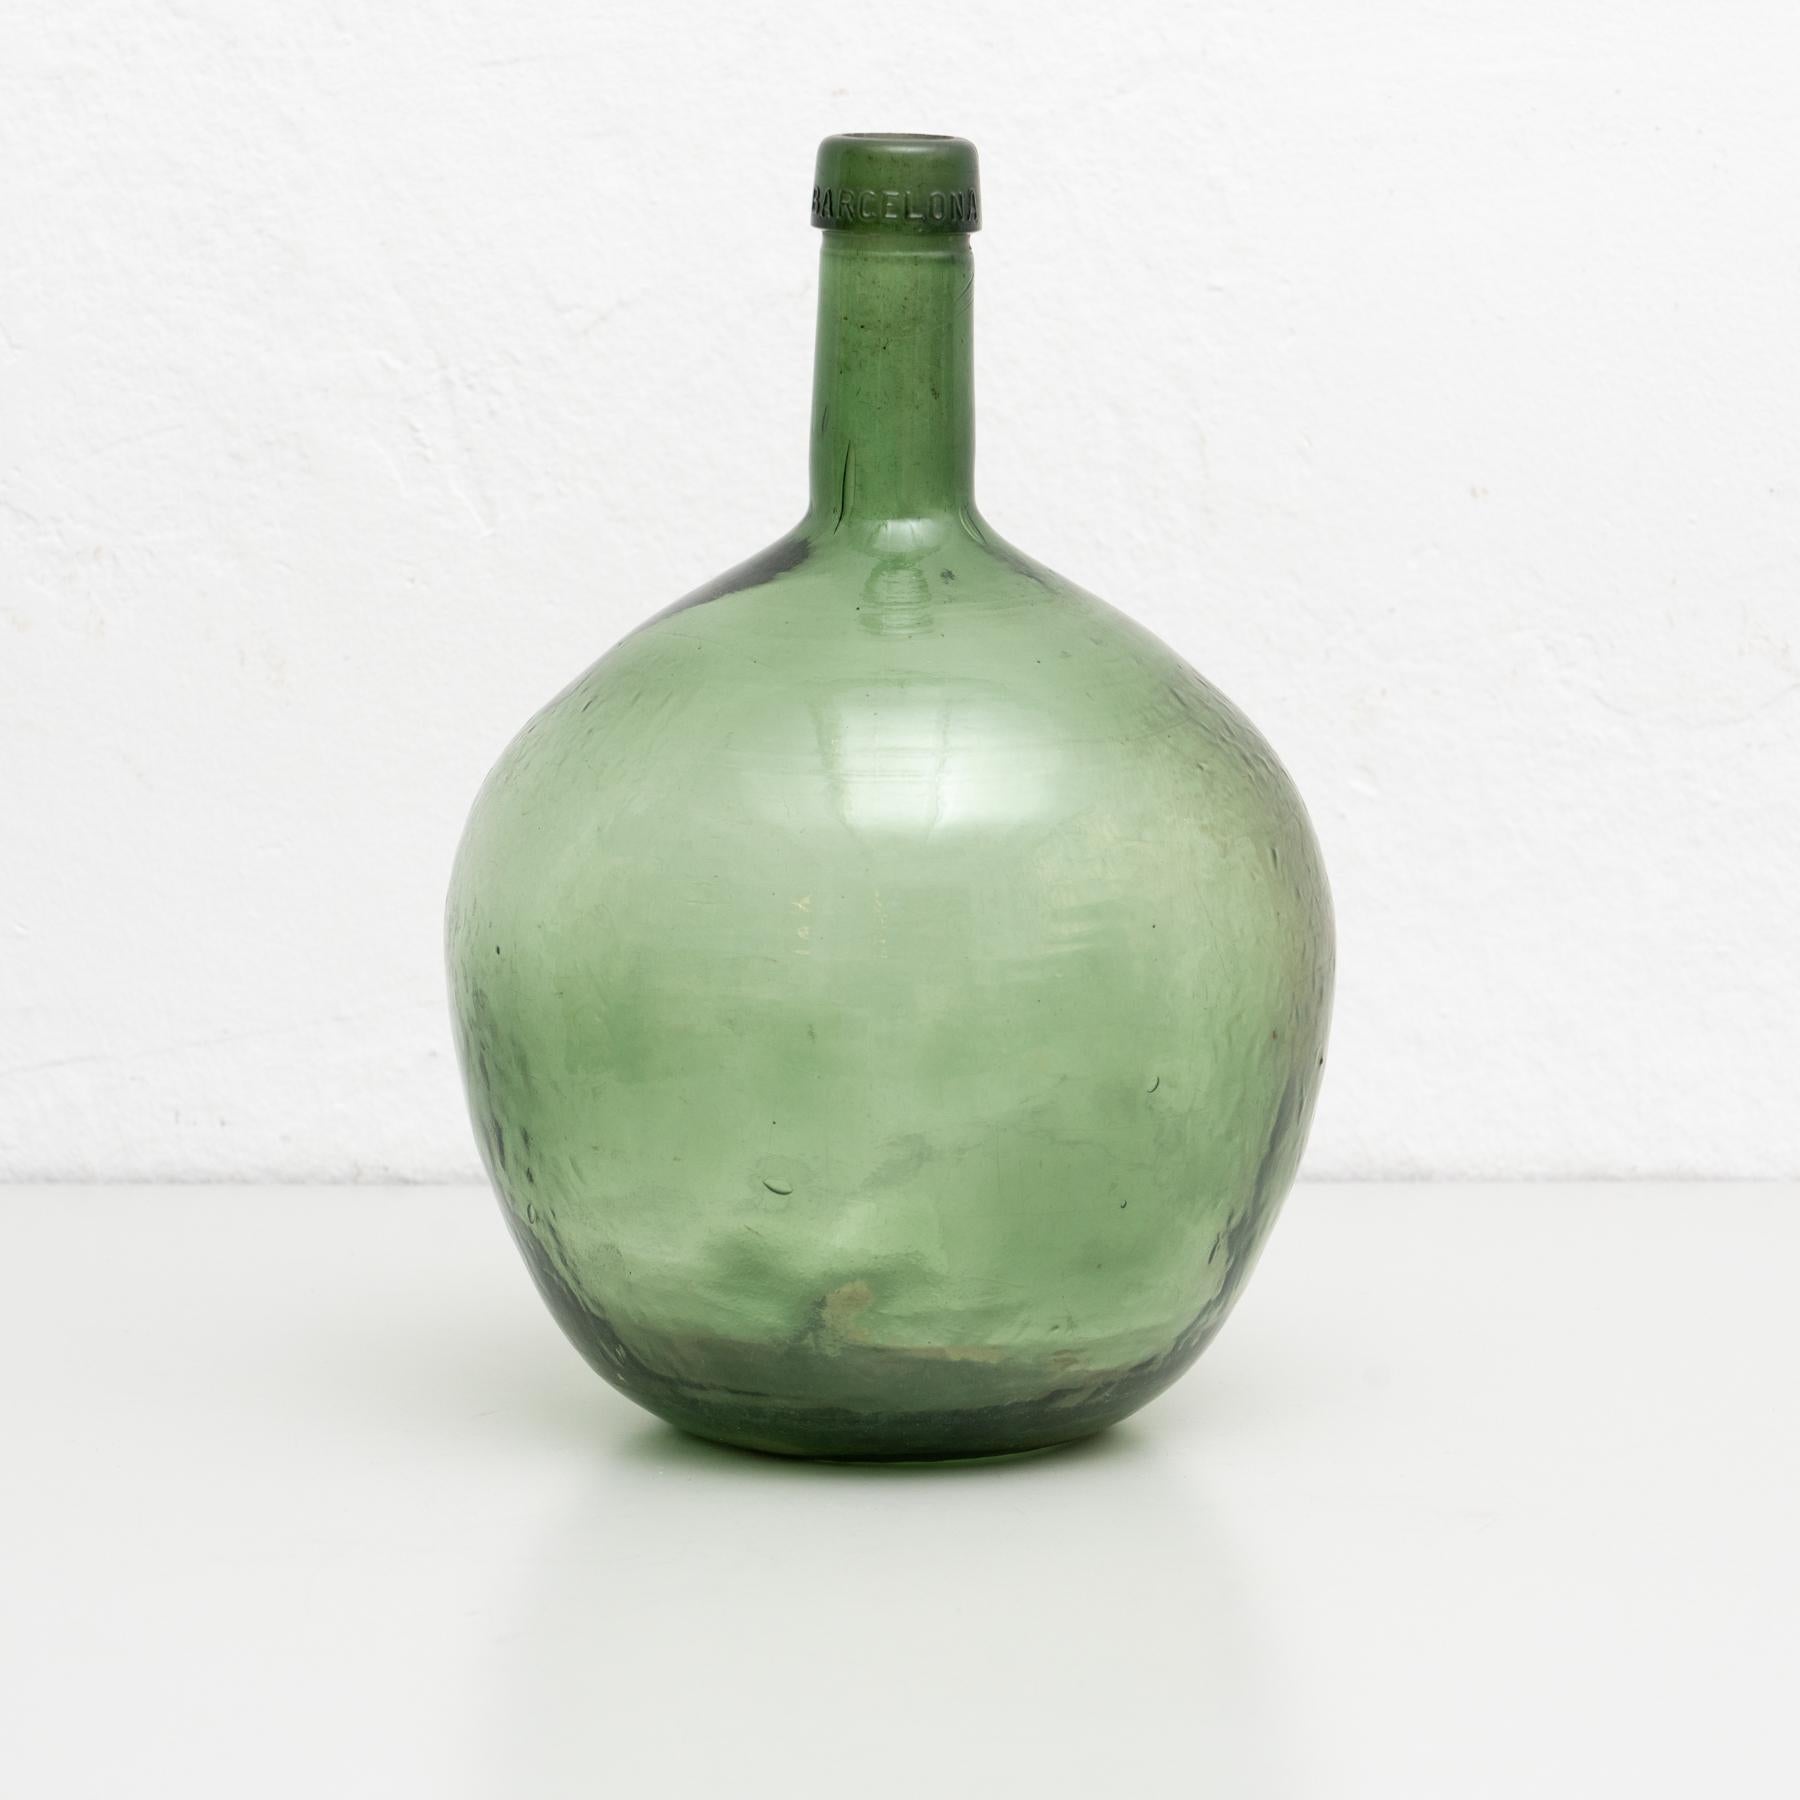 Antique Demijohn glass bottle from Barcelona.
Made in glass.

In original condition with minor wear consistent of age and use, preserving a beautiful patina.